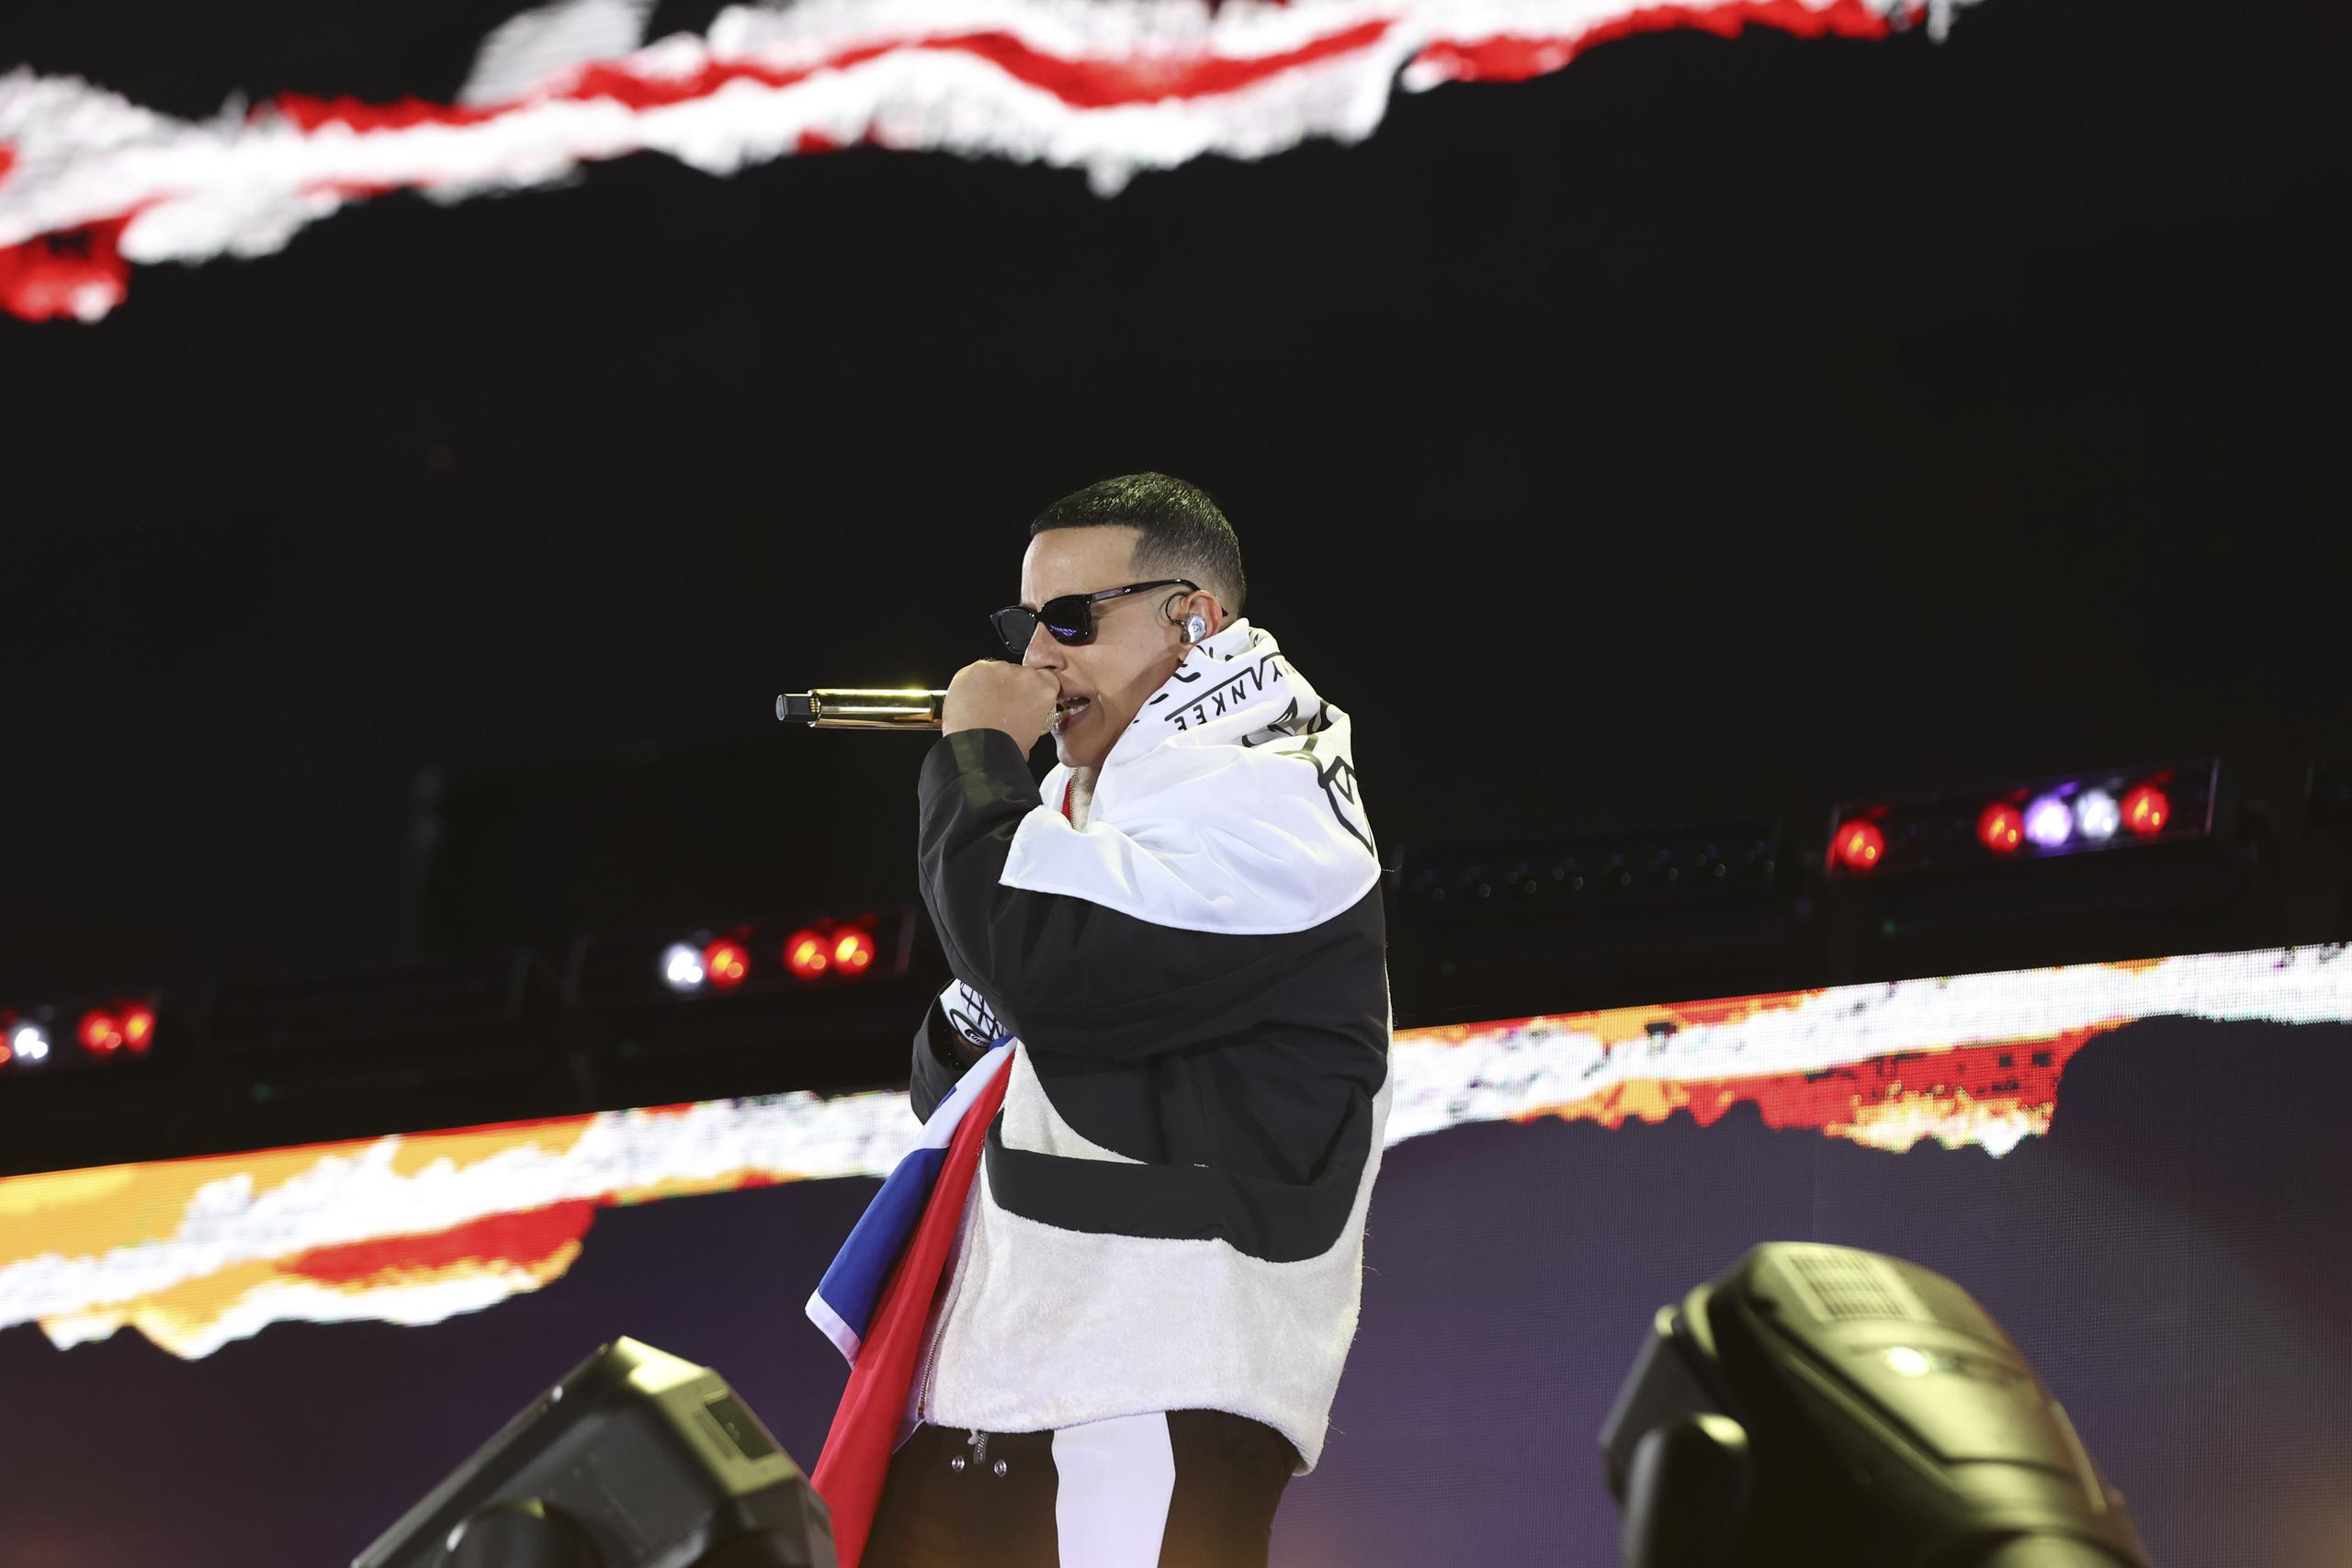 Daddy Yankee, who appeared before thousands of people at the National Stadium in Santiago in Chile in the last week of September, assured that he will stay living on the island and from here he will commit himself more to the sport at the executive level.